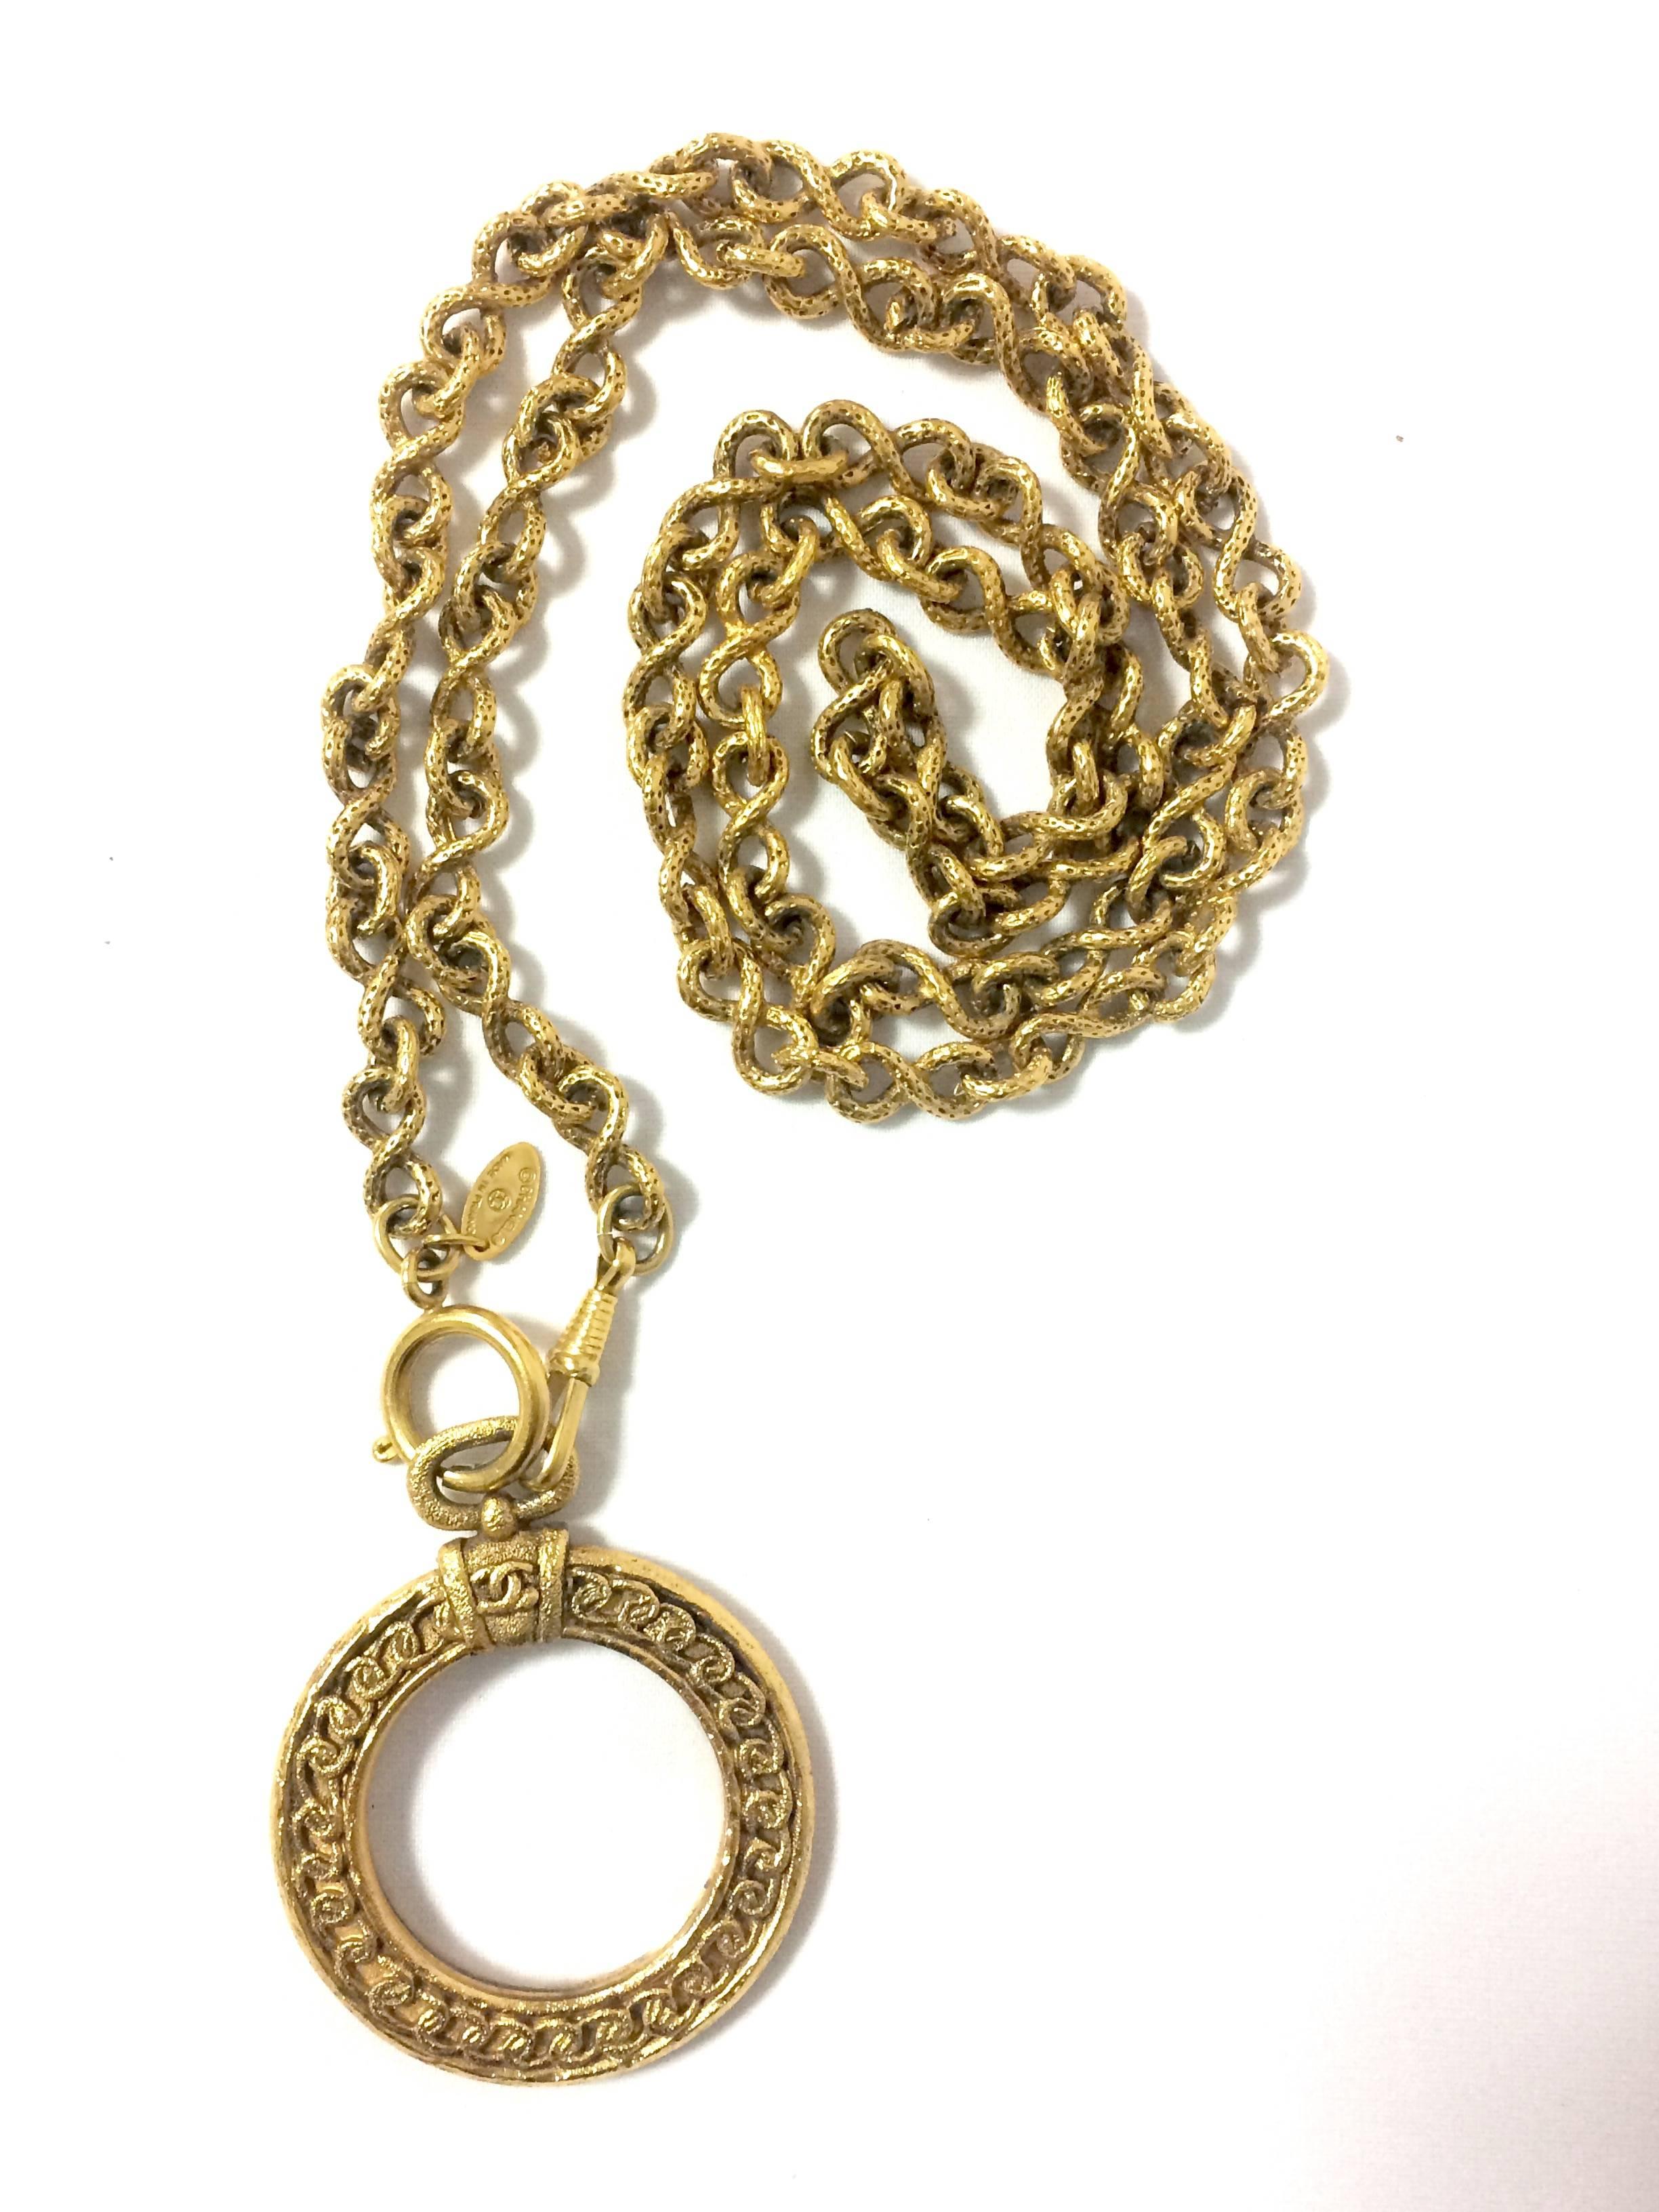 Vintage CHANEL long chain necklace with round glass loupe pendant top and CC. 4